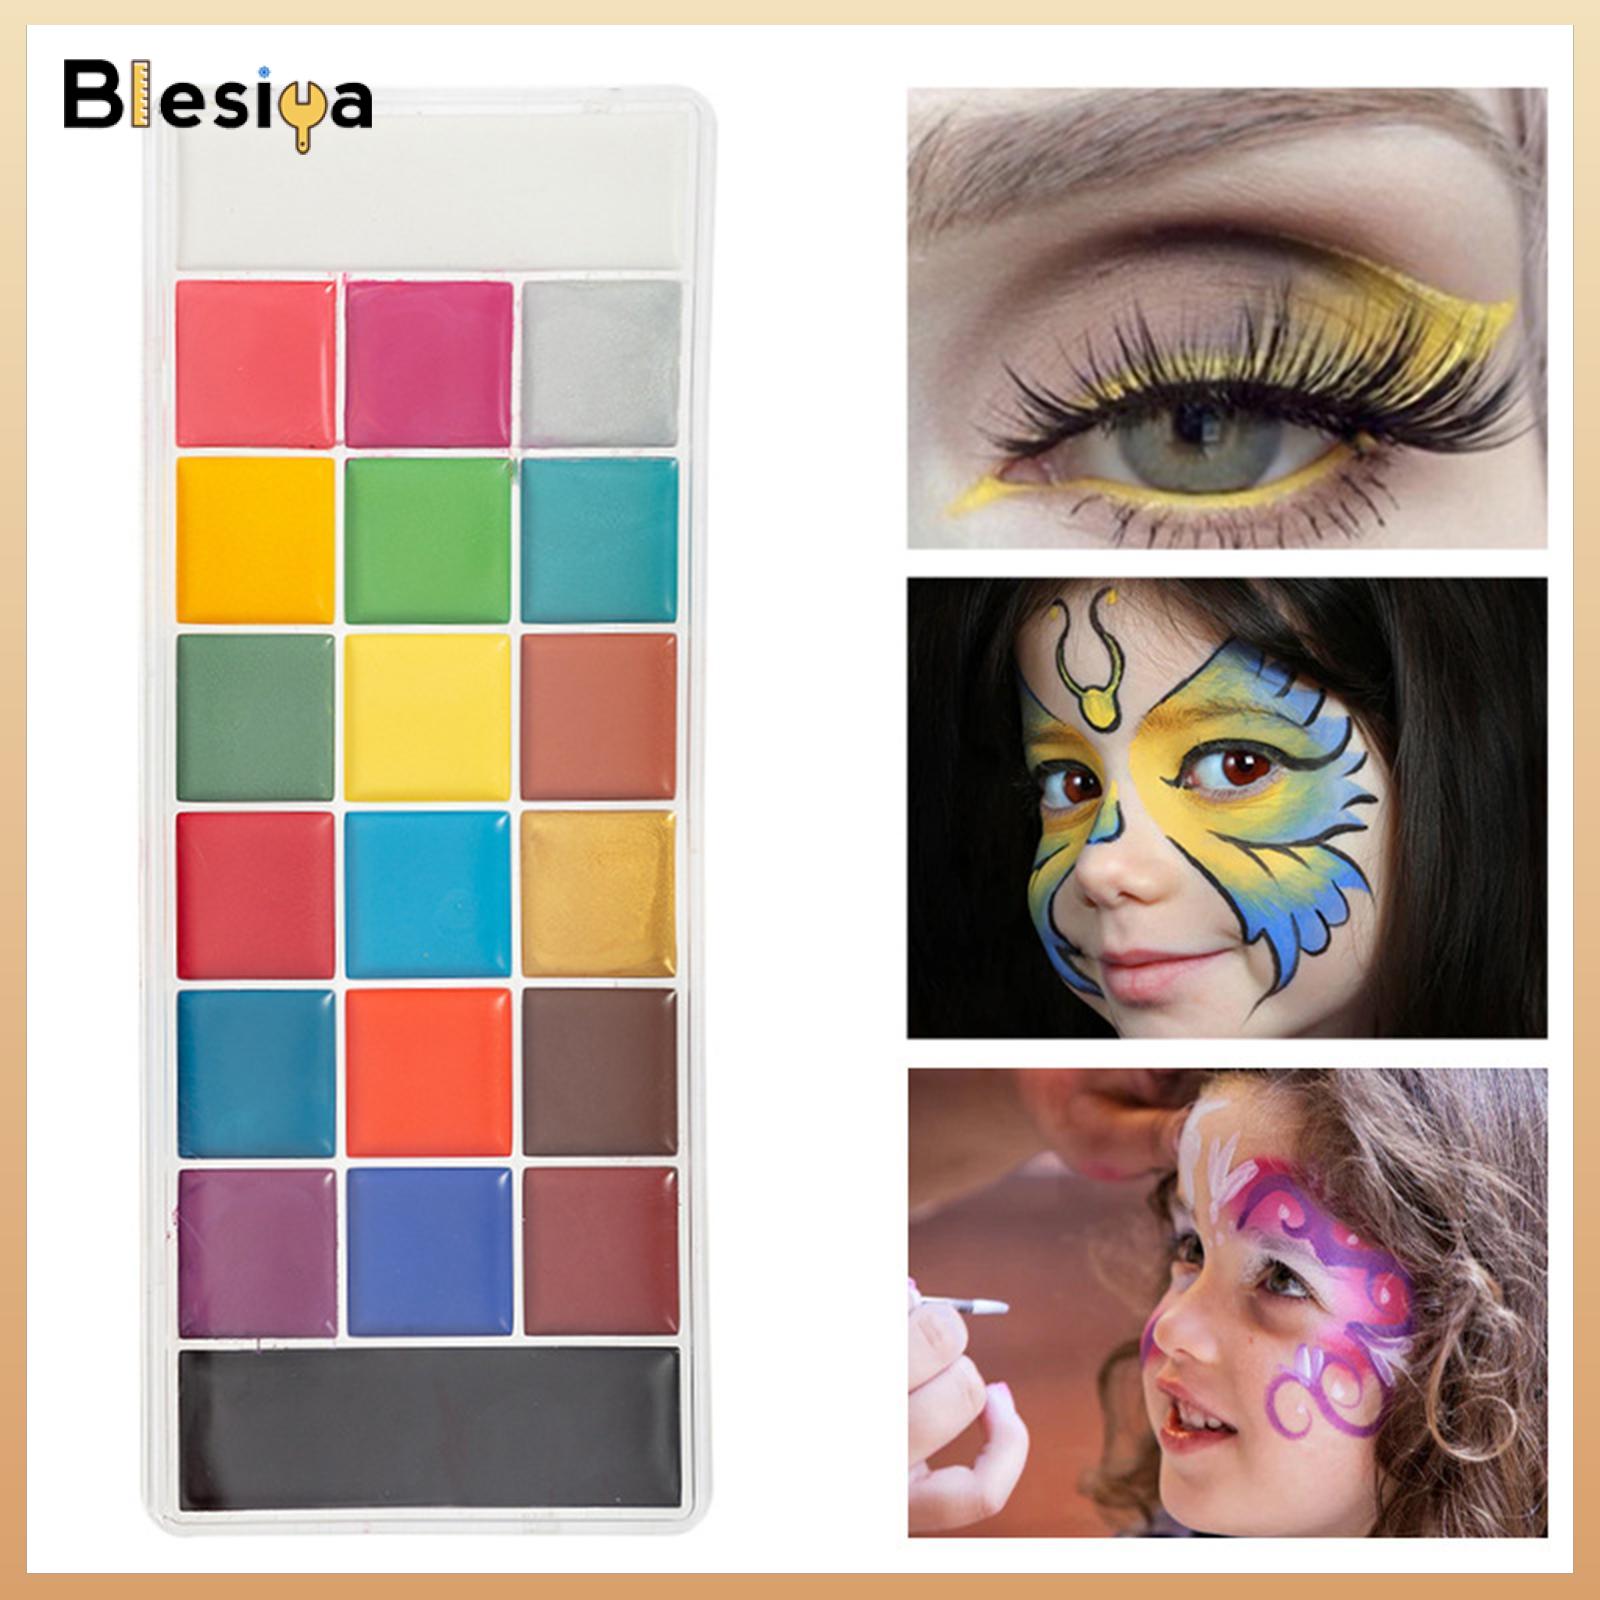 Blesiya Face Body Paint Painting Palette Face Painting for Halloween